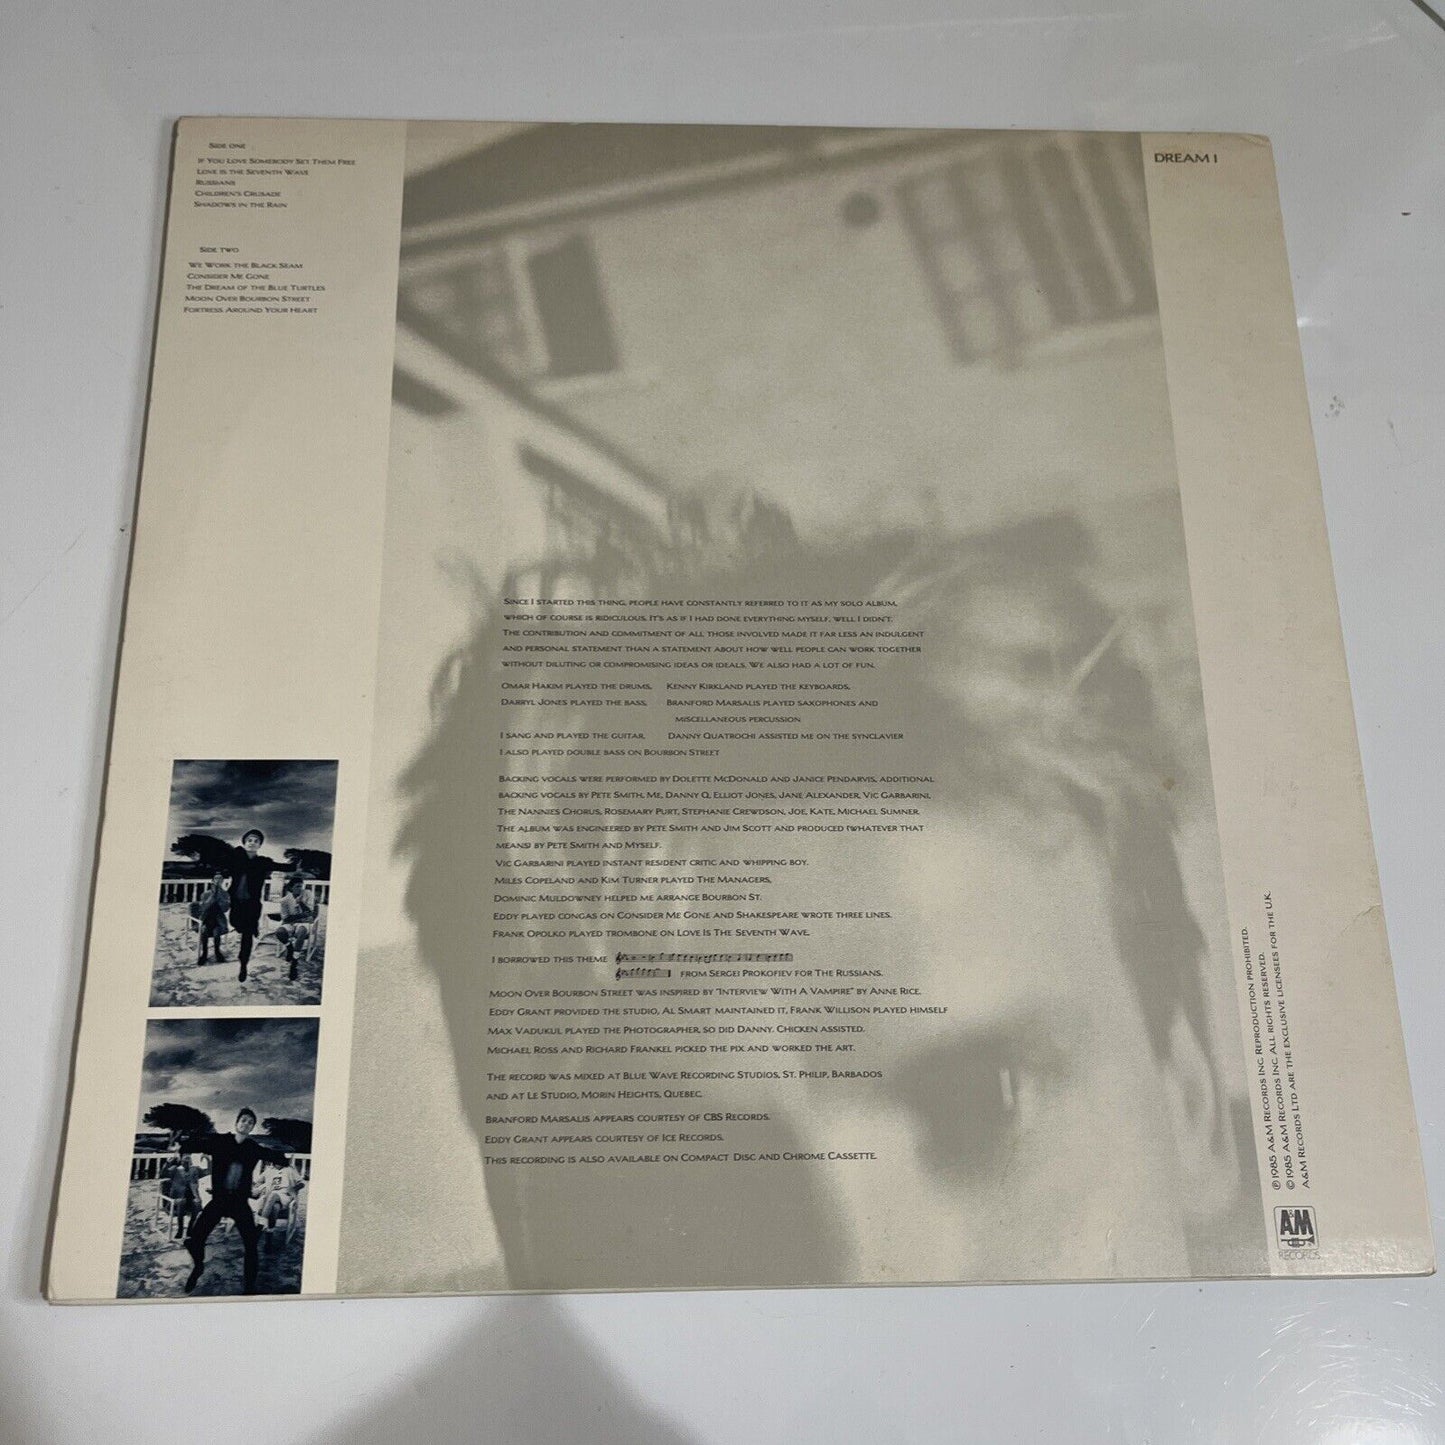 Sting – The Dream Of The Blue Turtles 1985 LP Vinyl Record A&M Records DREAM 1